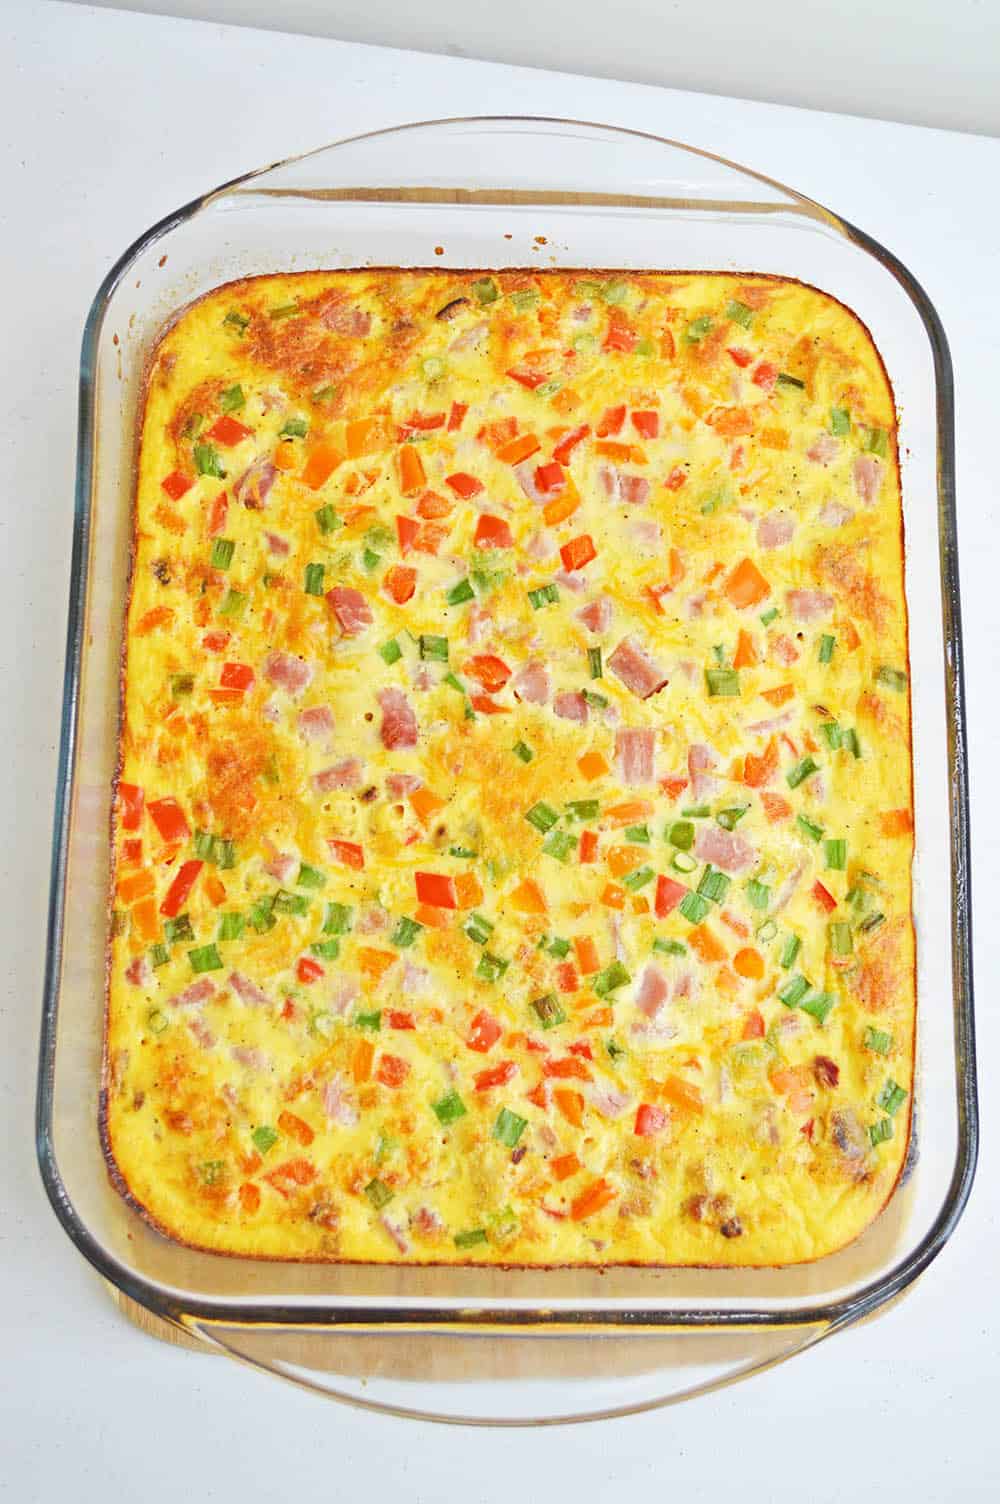 healthy breakfast casserole from the oven